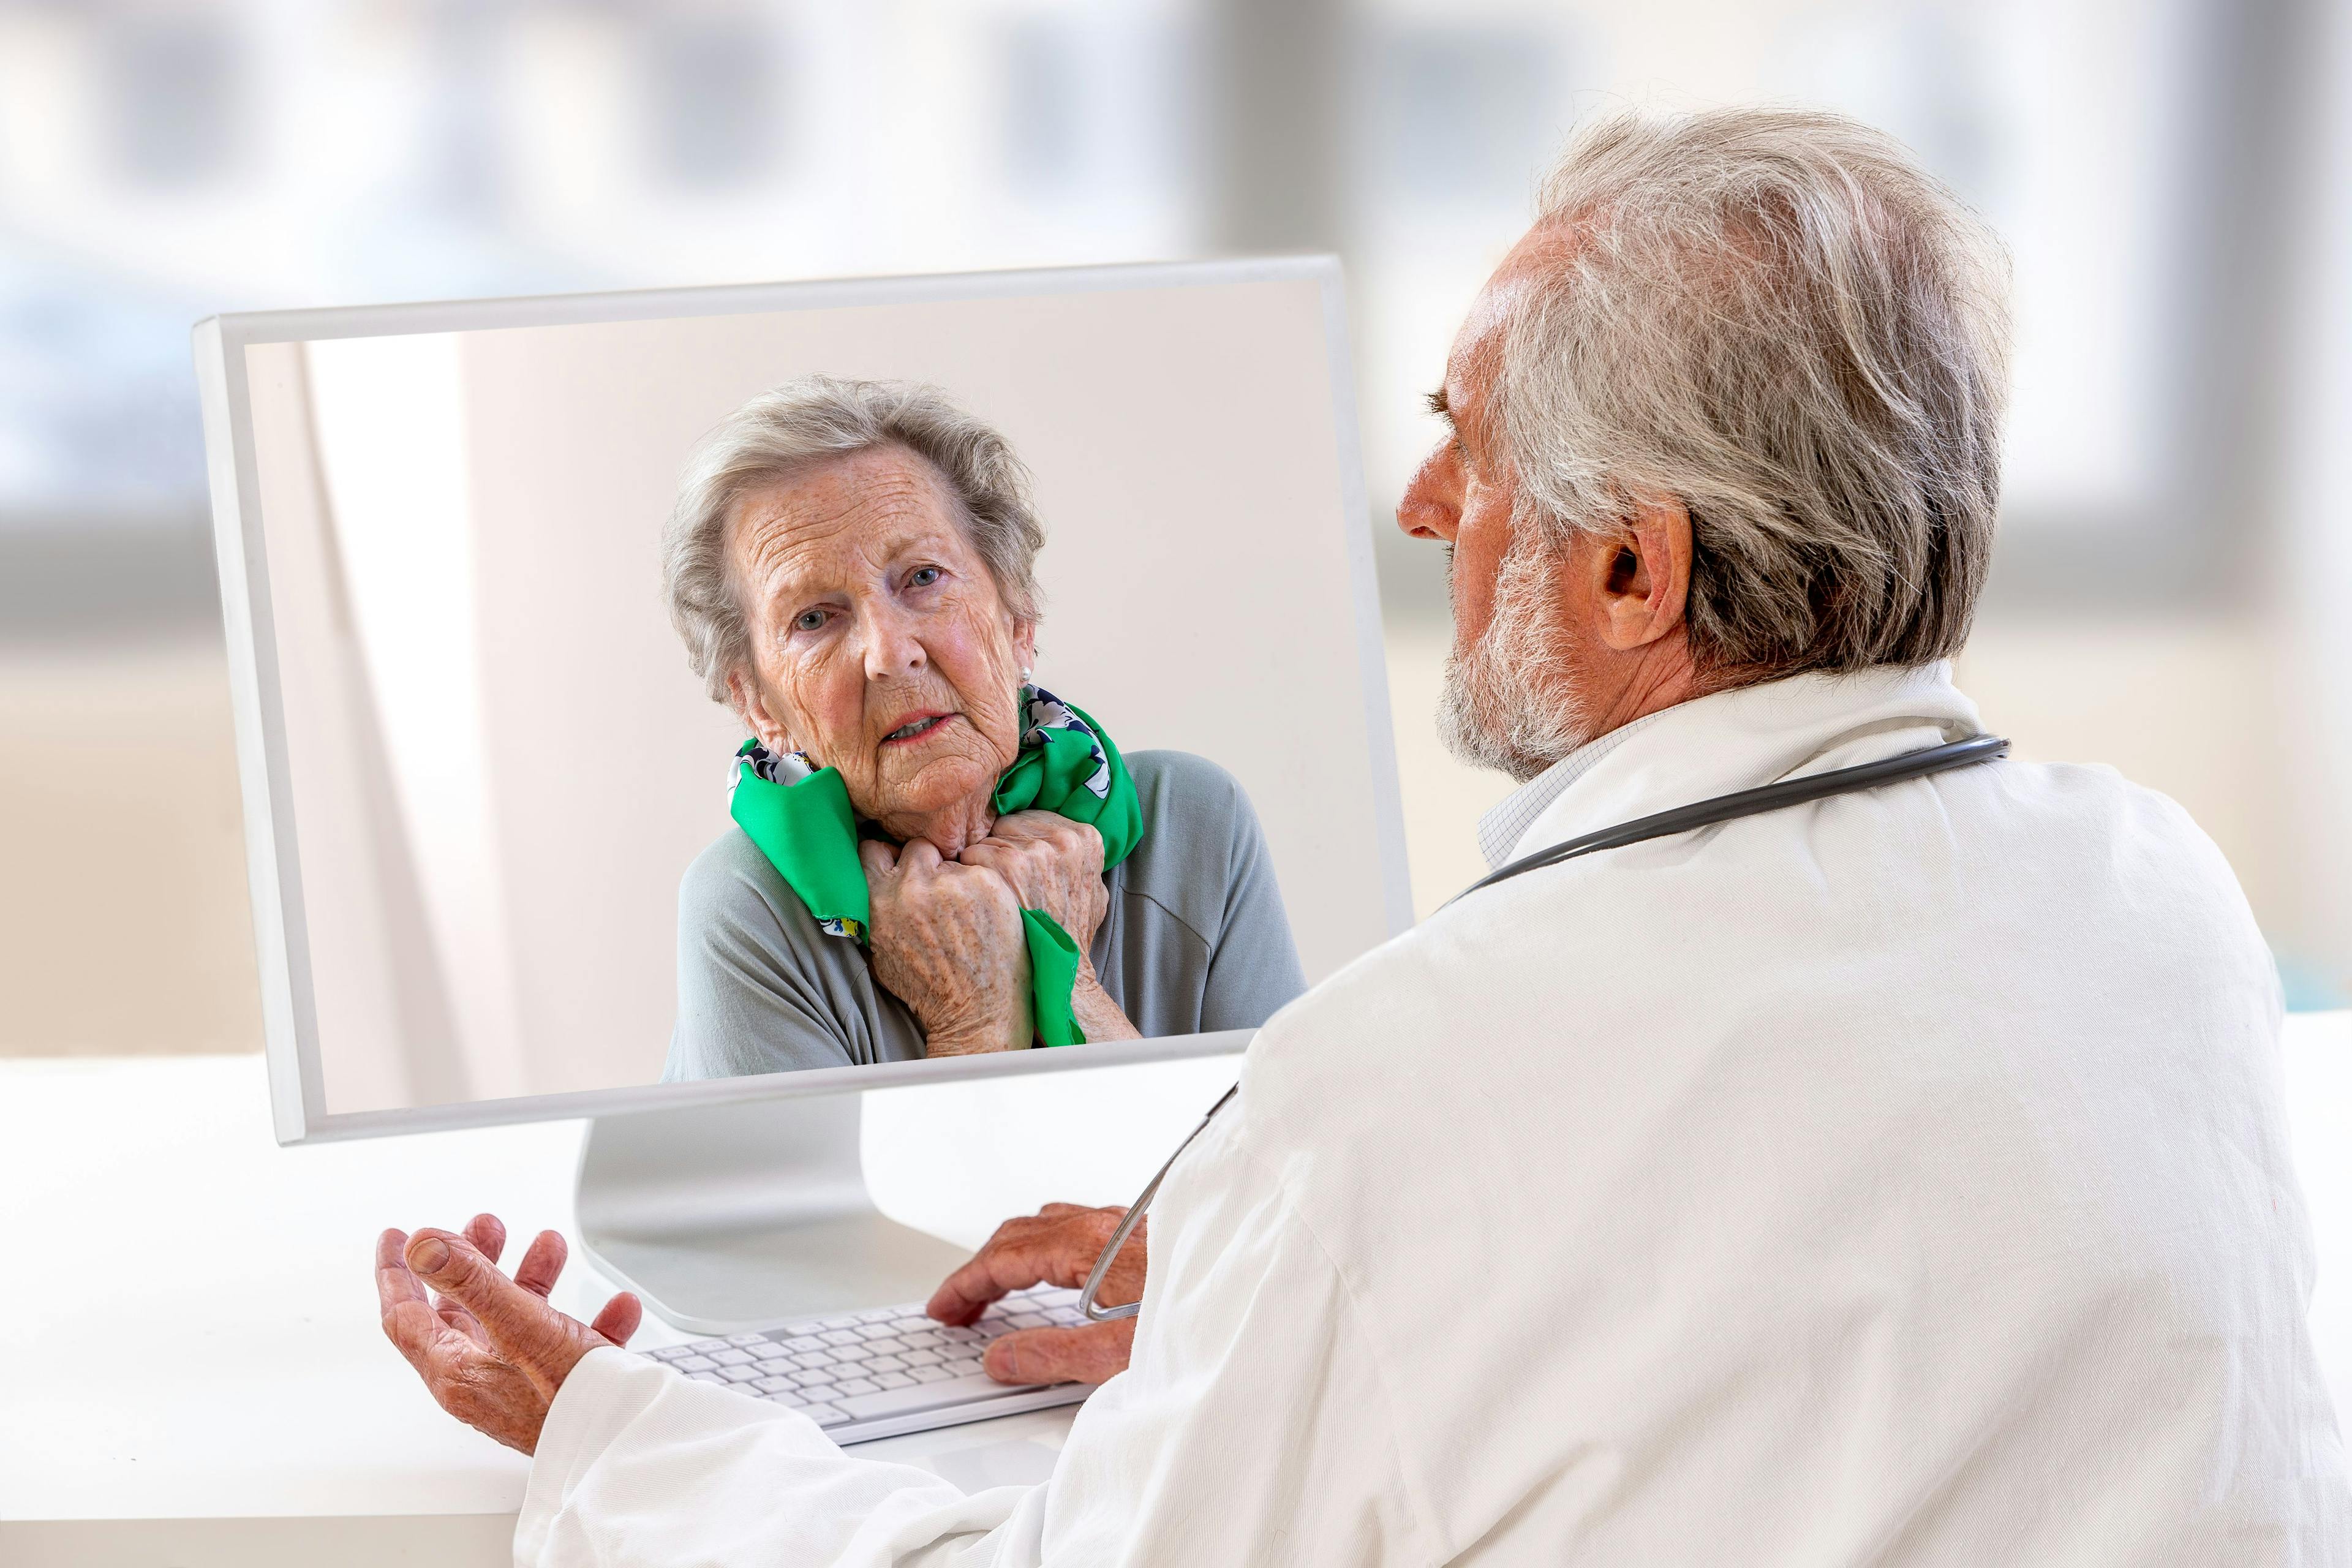 More Patients Use and Trust Telehealth: Report